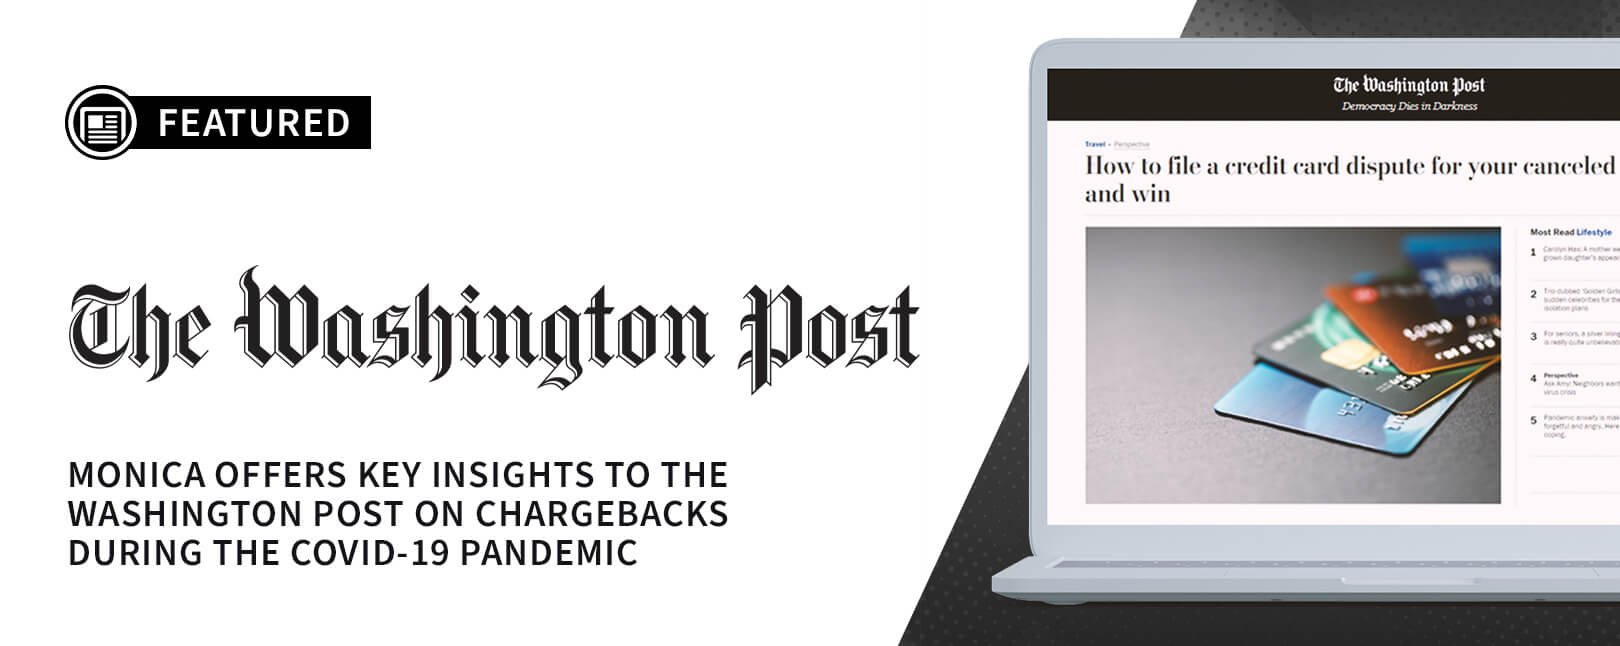 Chargebacks911® COO Quoted in Washington Post